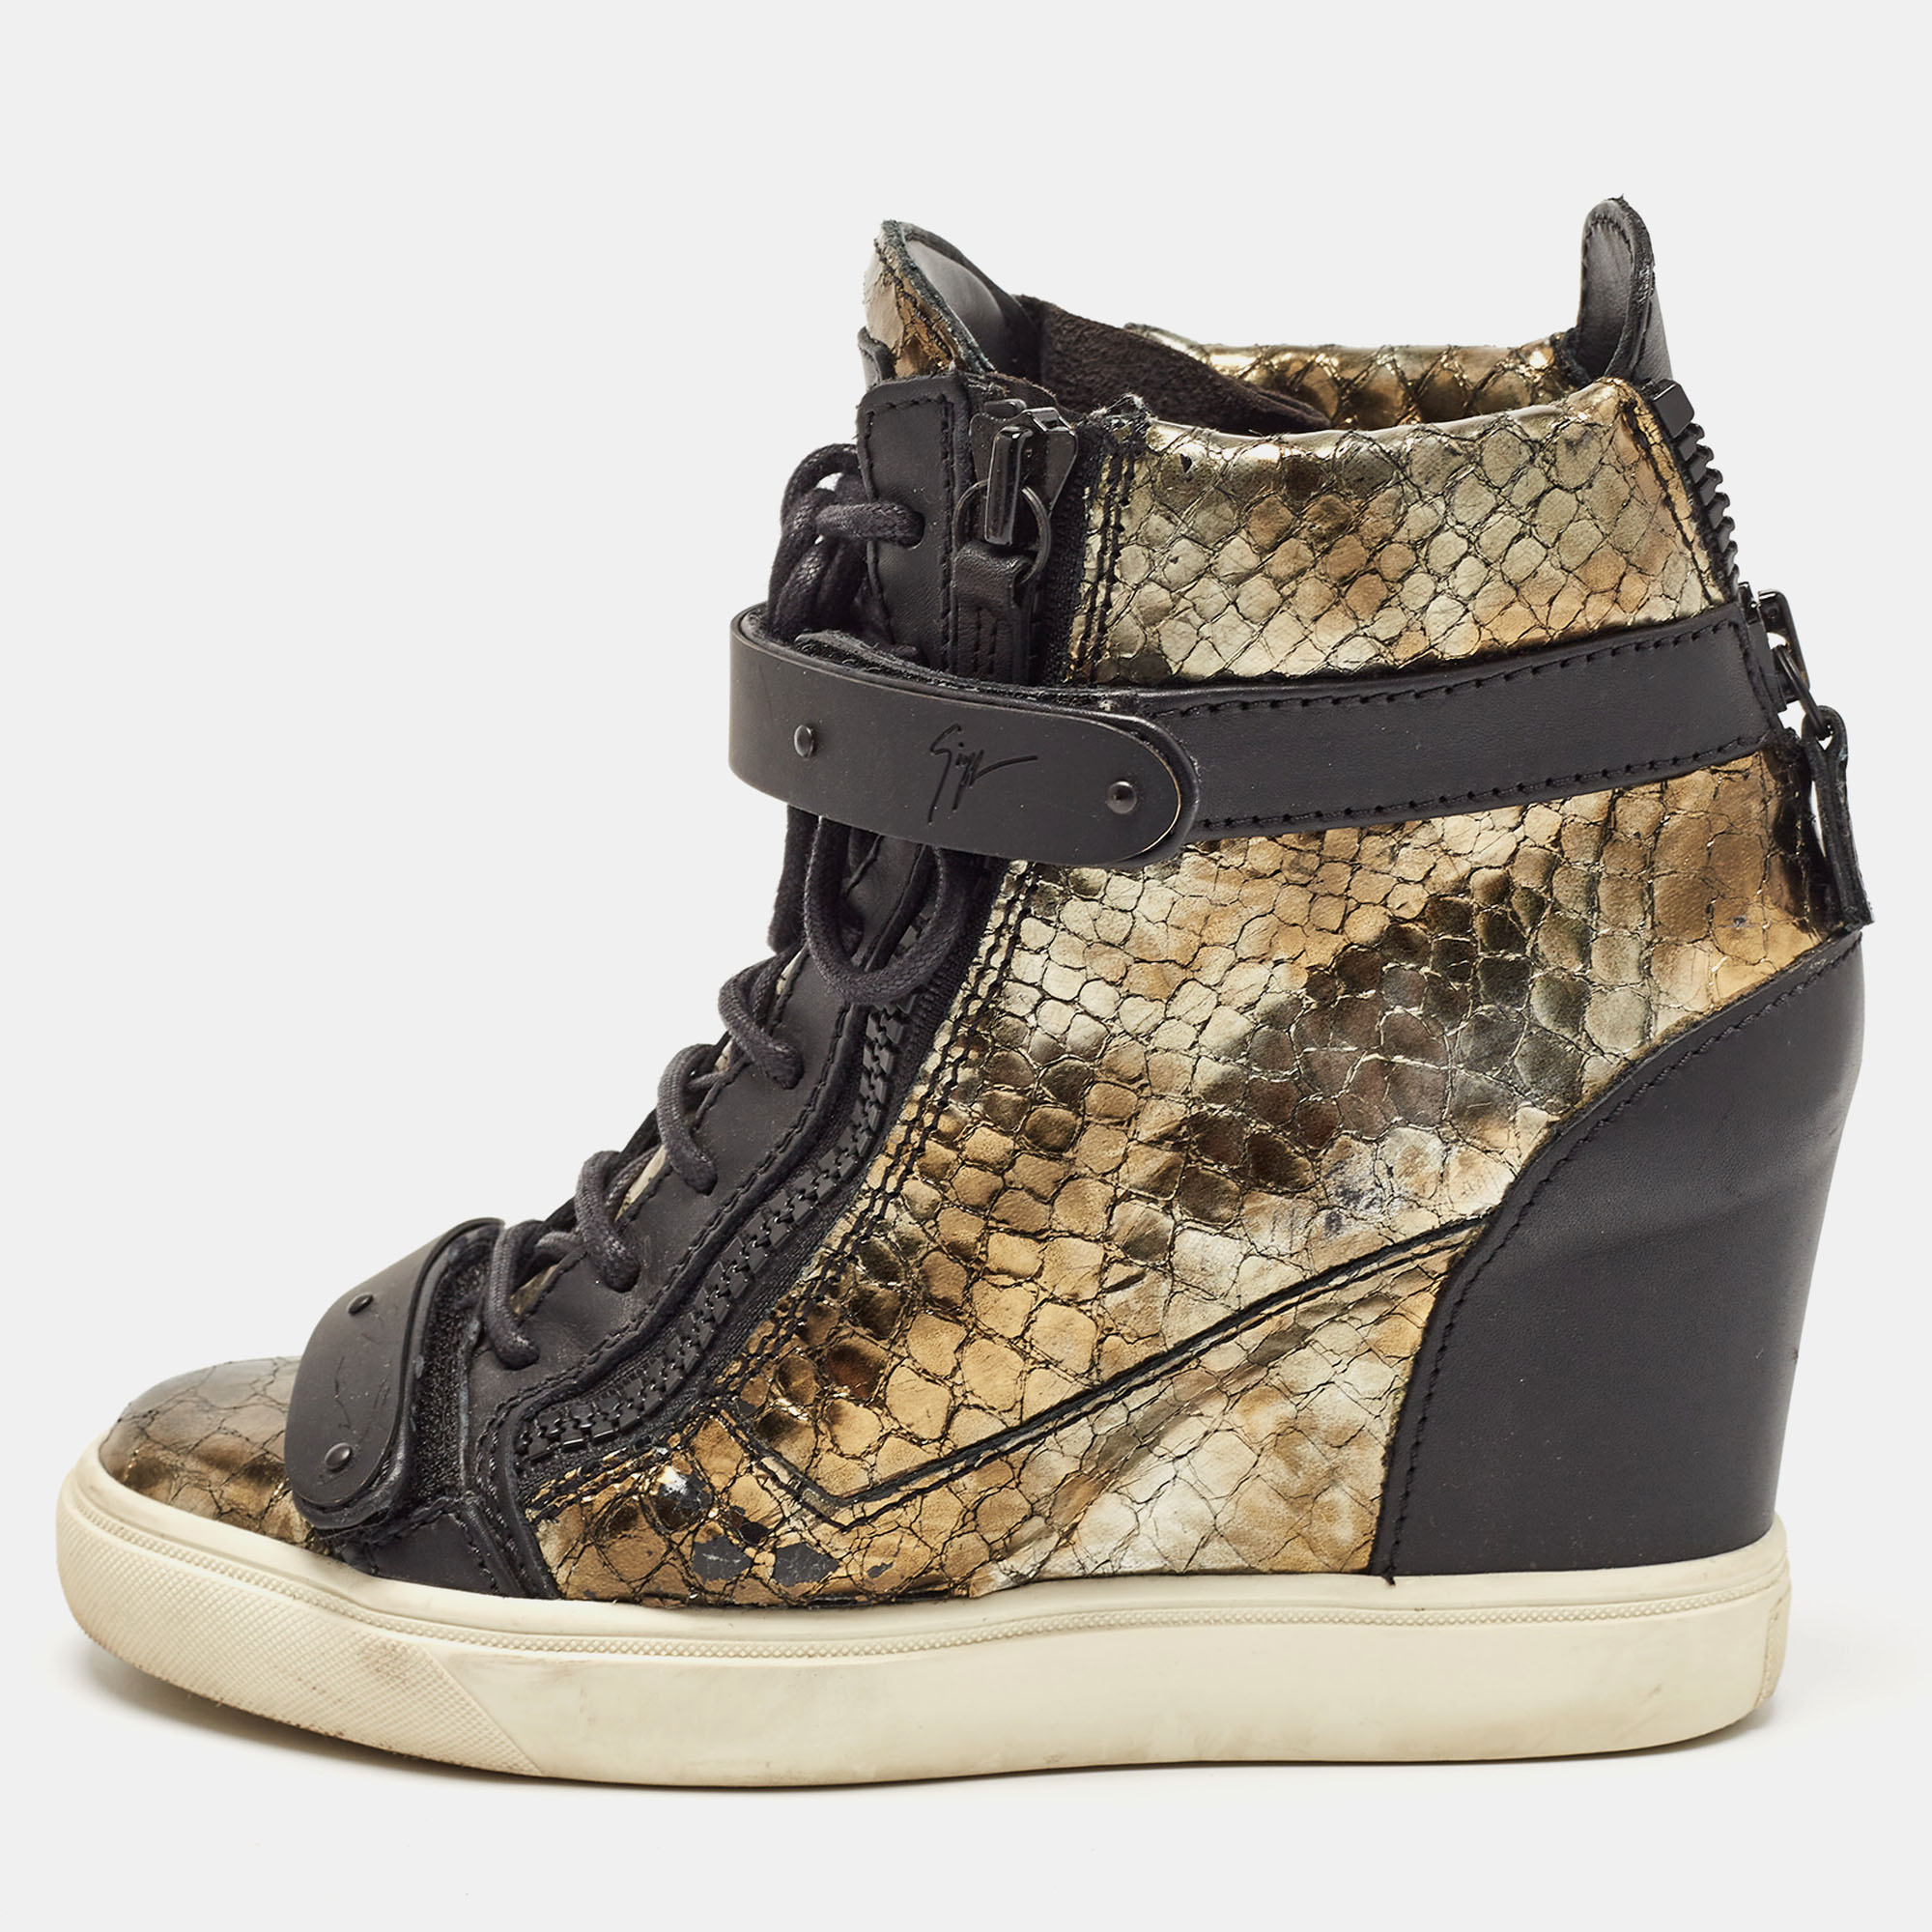 Upgrade your style with these Giuseppe Zanotti sneakers. Meticulously designed for fashion and comfort theyre the ideal choice for a trendy and comfortable stride.